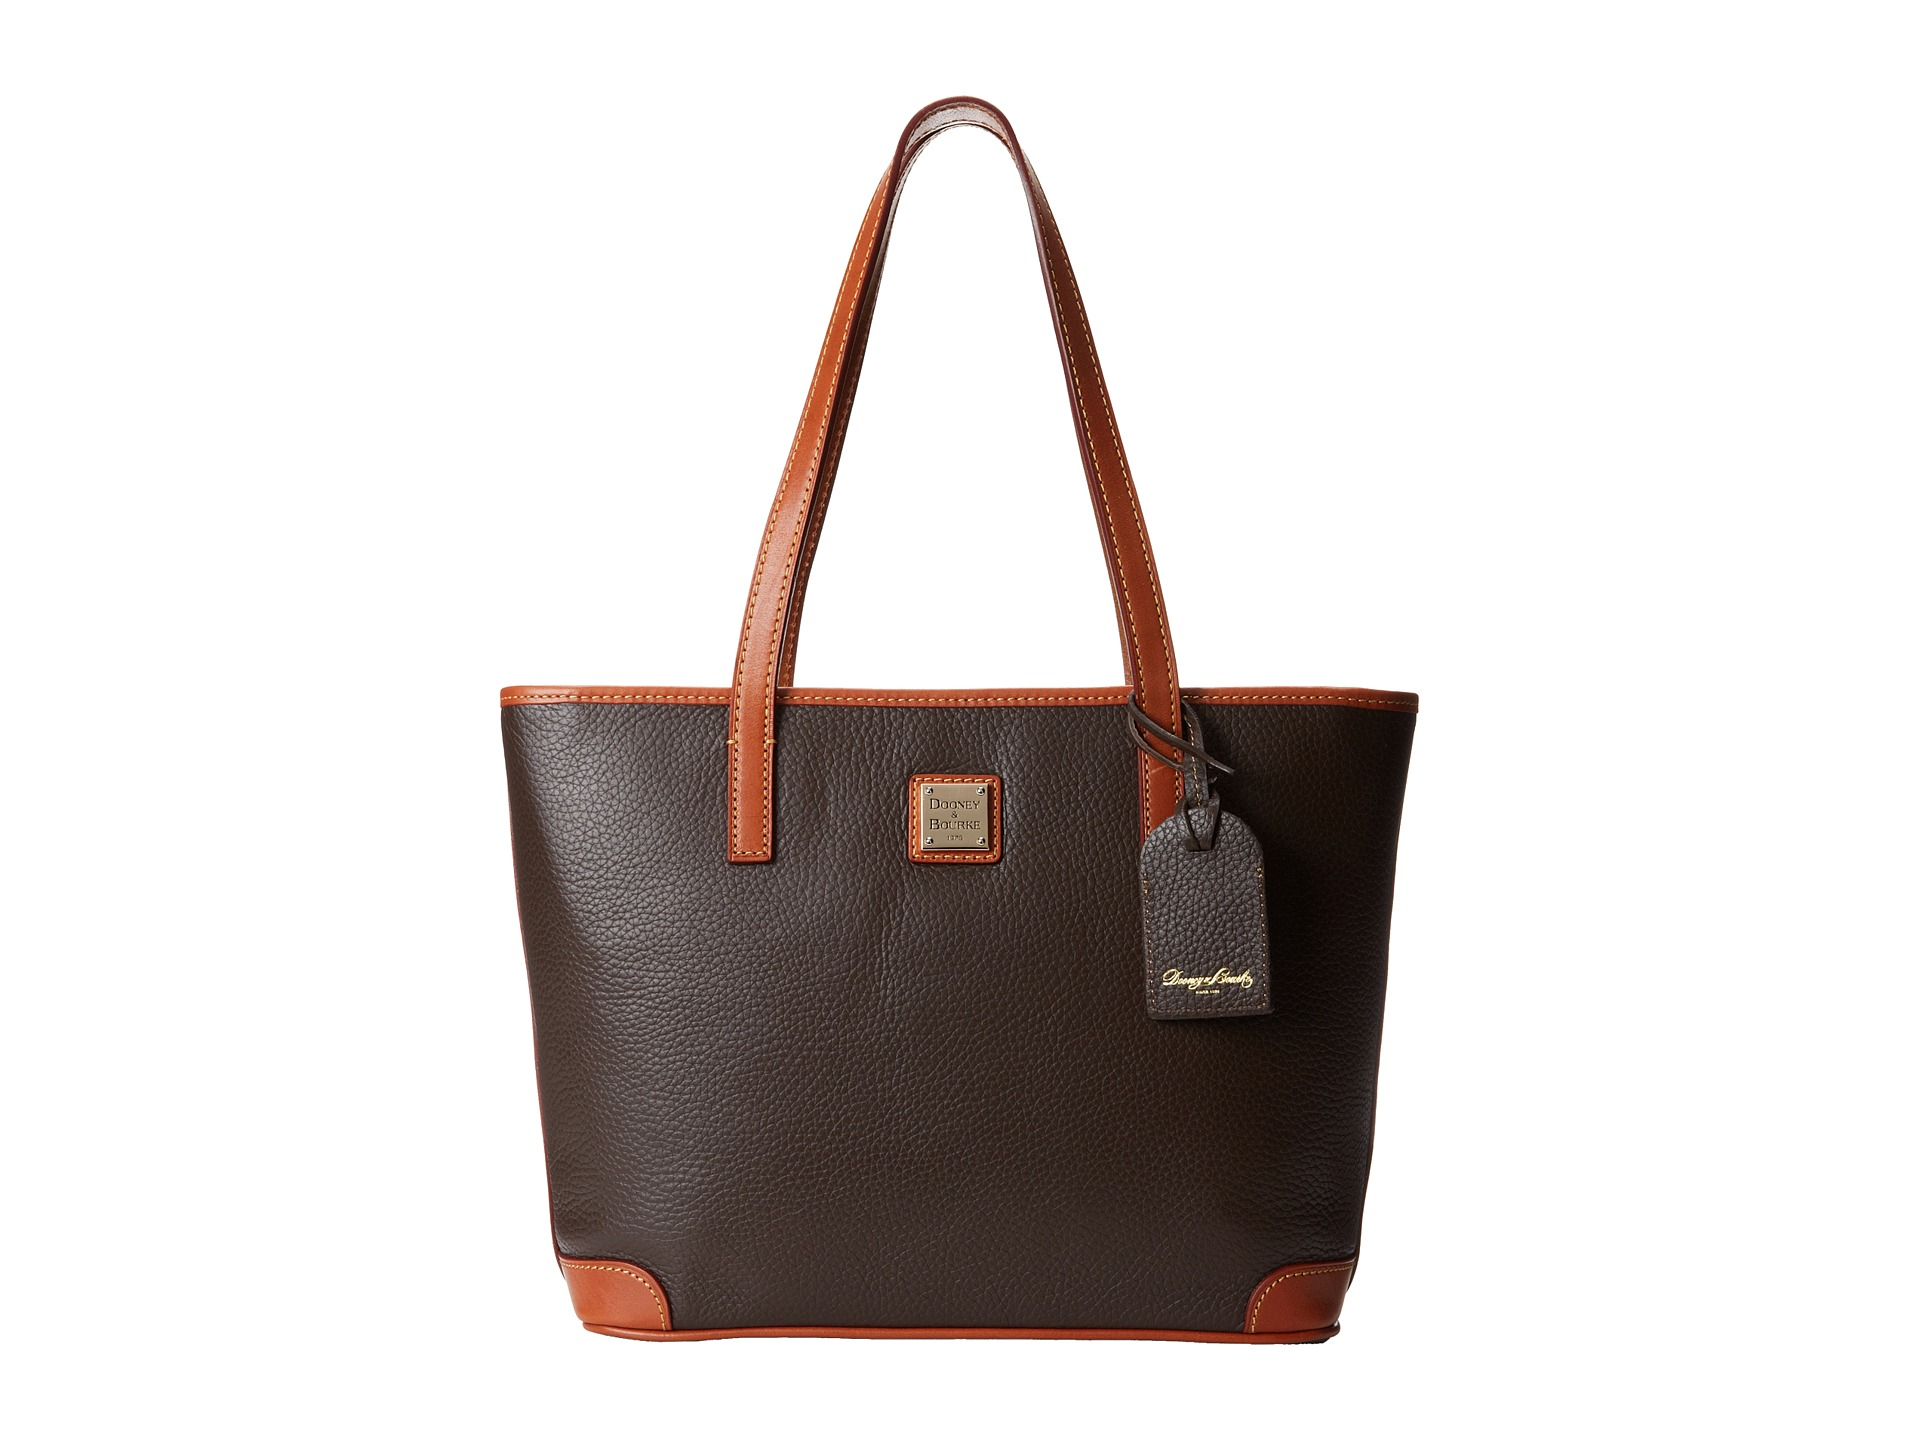 Dooney & Bourke Pebble Leather New Colors Charleston Shopper in Brown ...